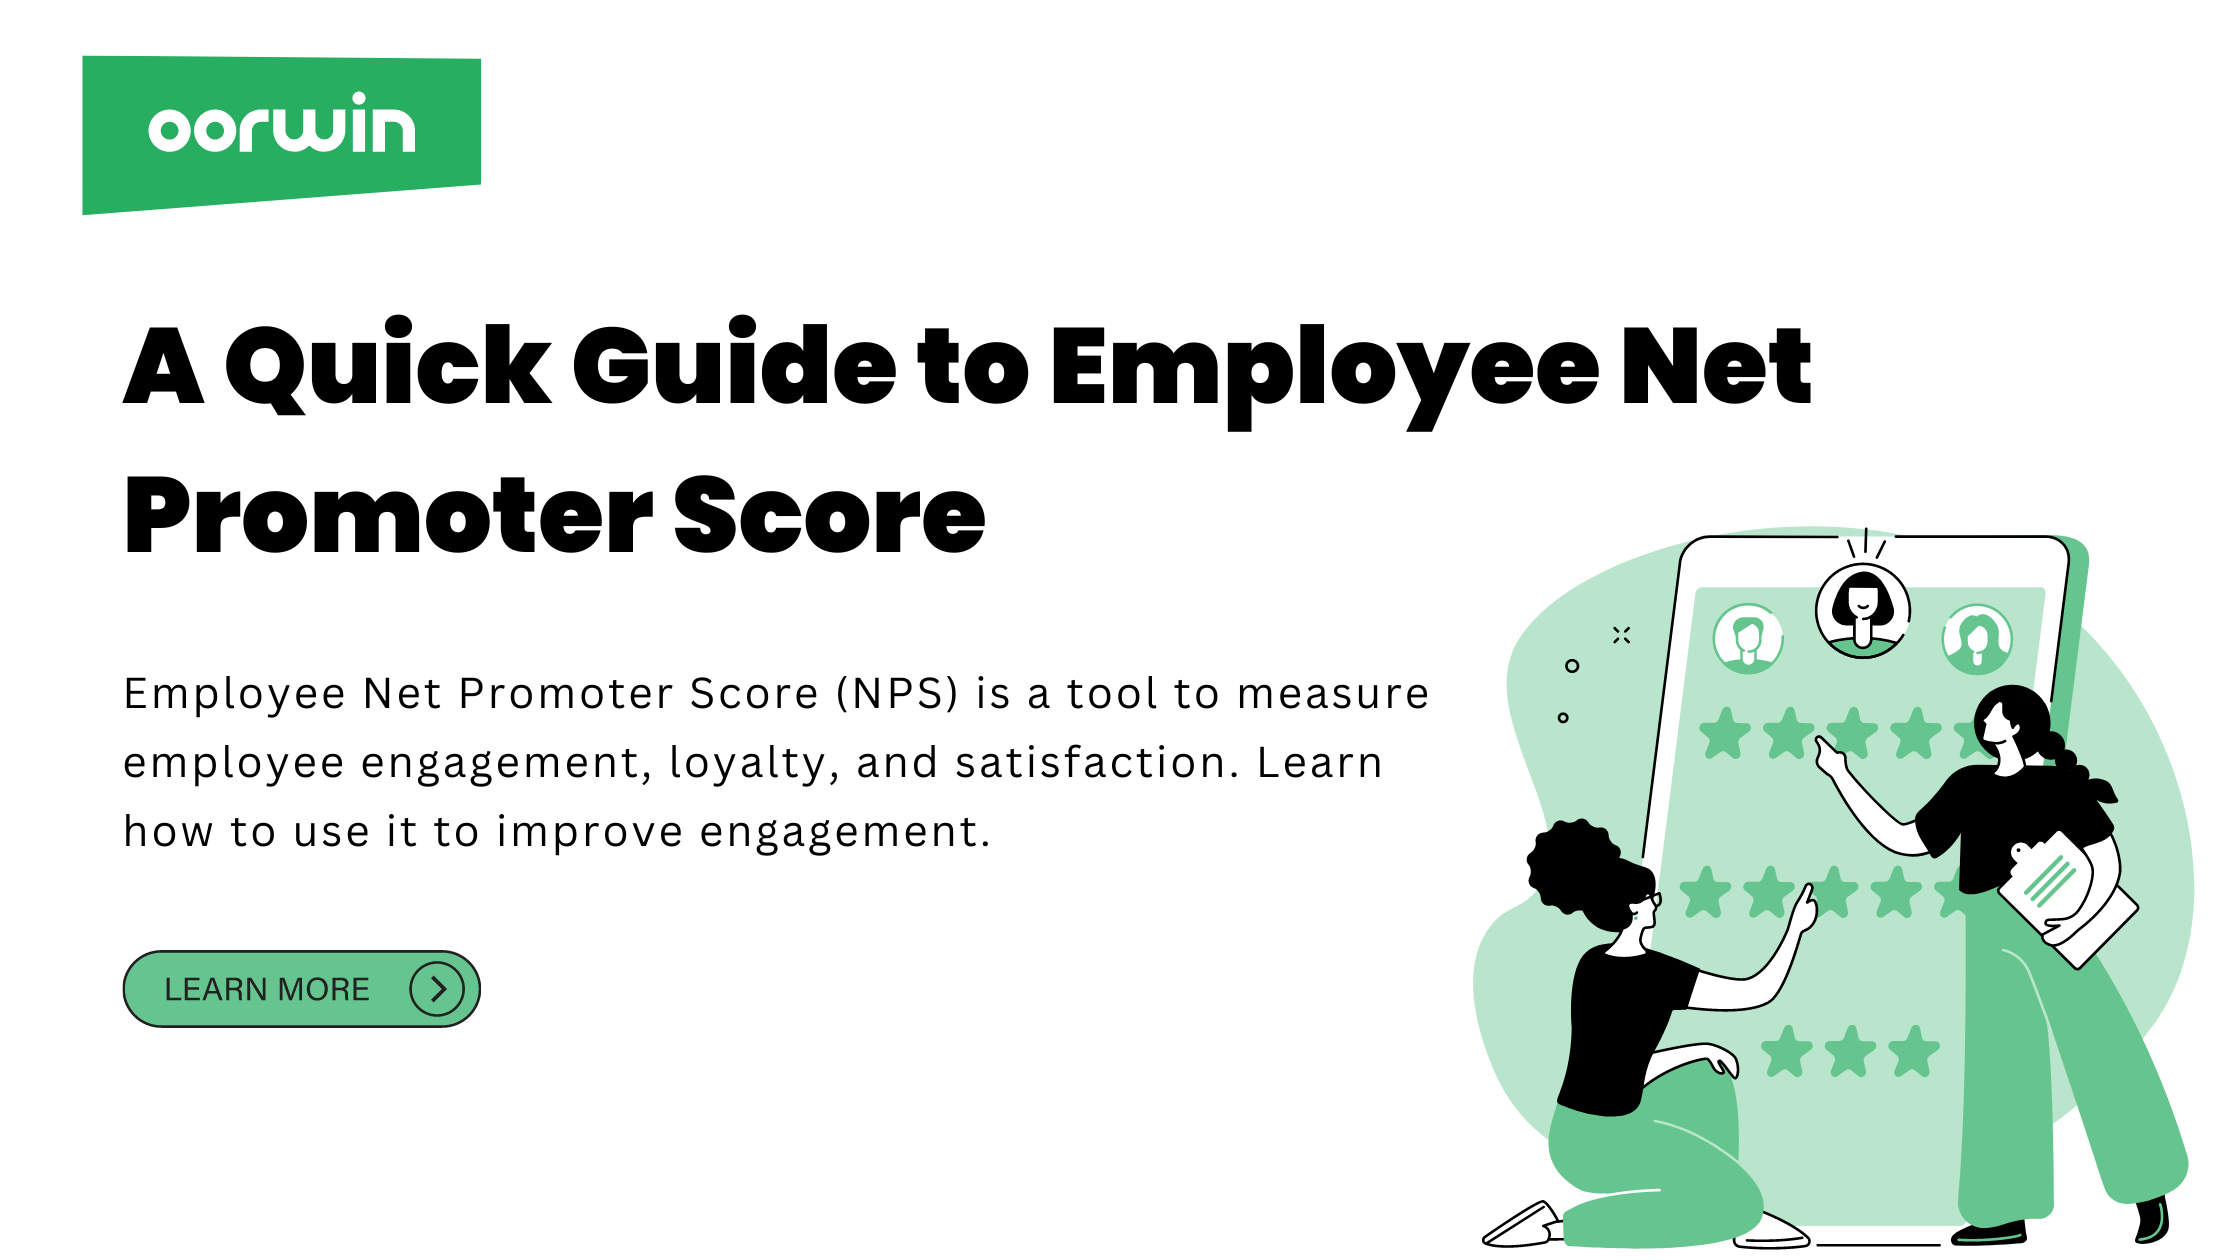 A Quick Guide to Employee Net Promoter Score | Oorwin